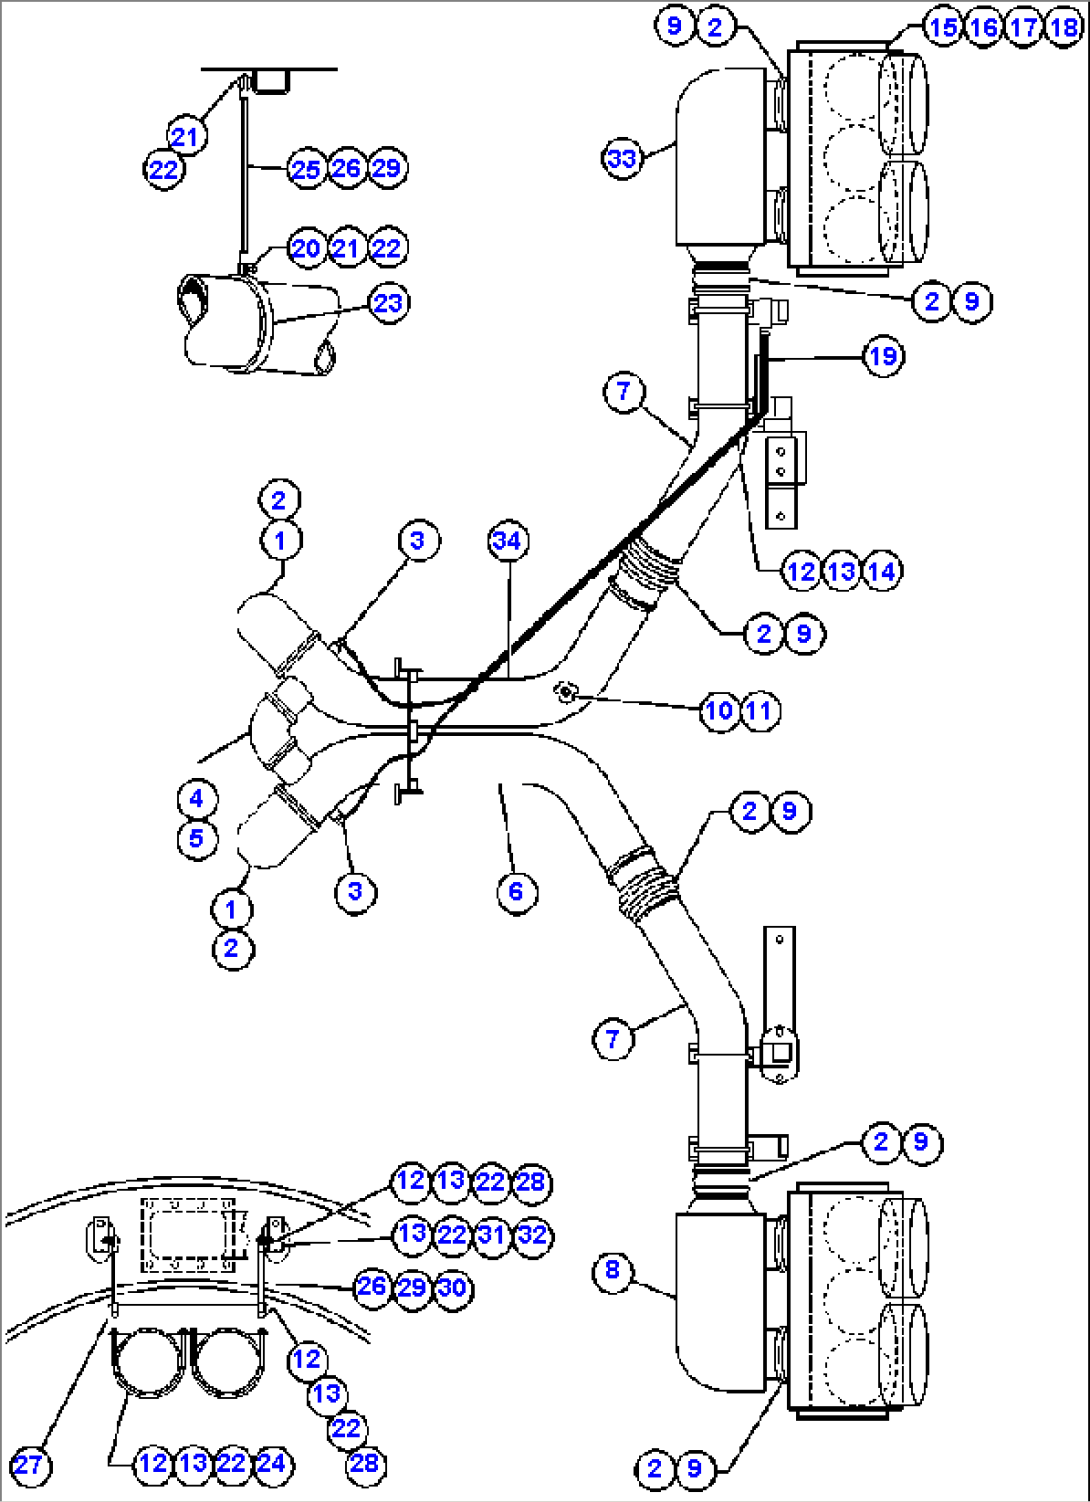 AIR CLEANER PIPING - 1